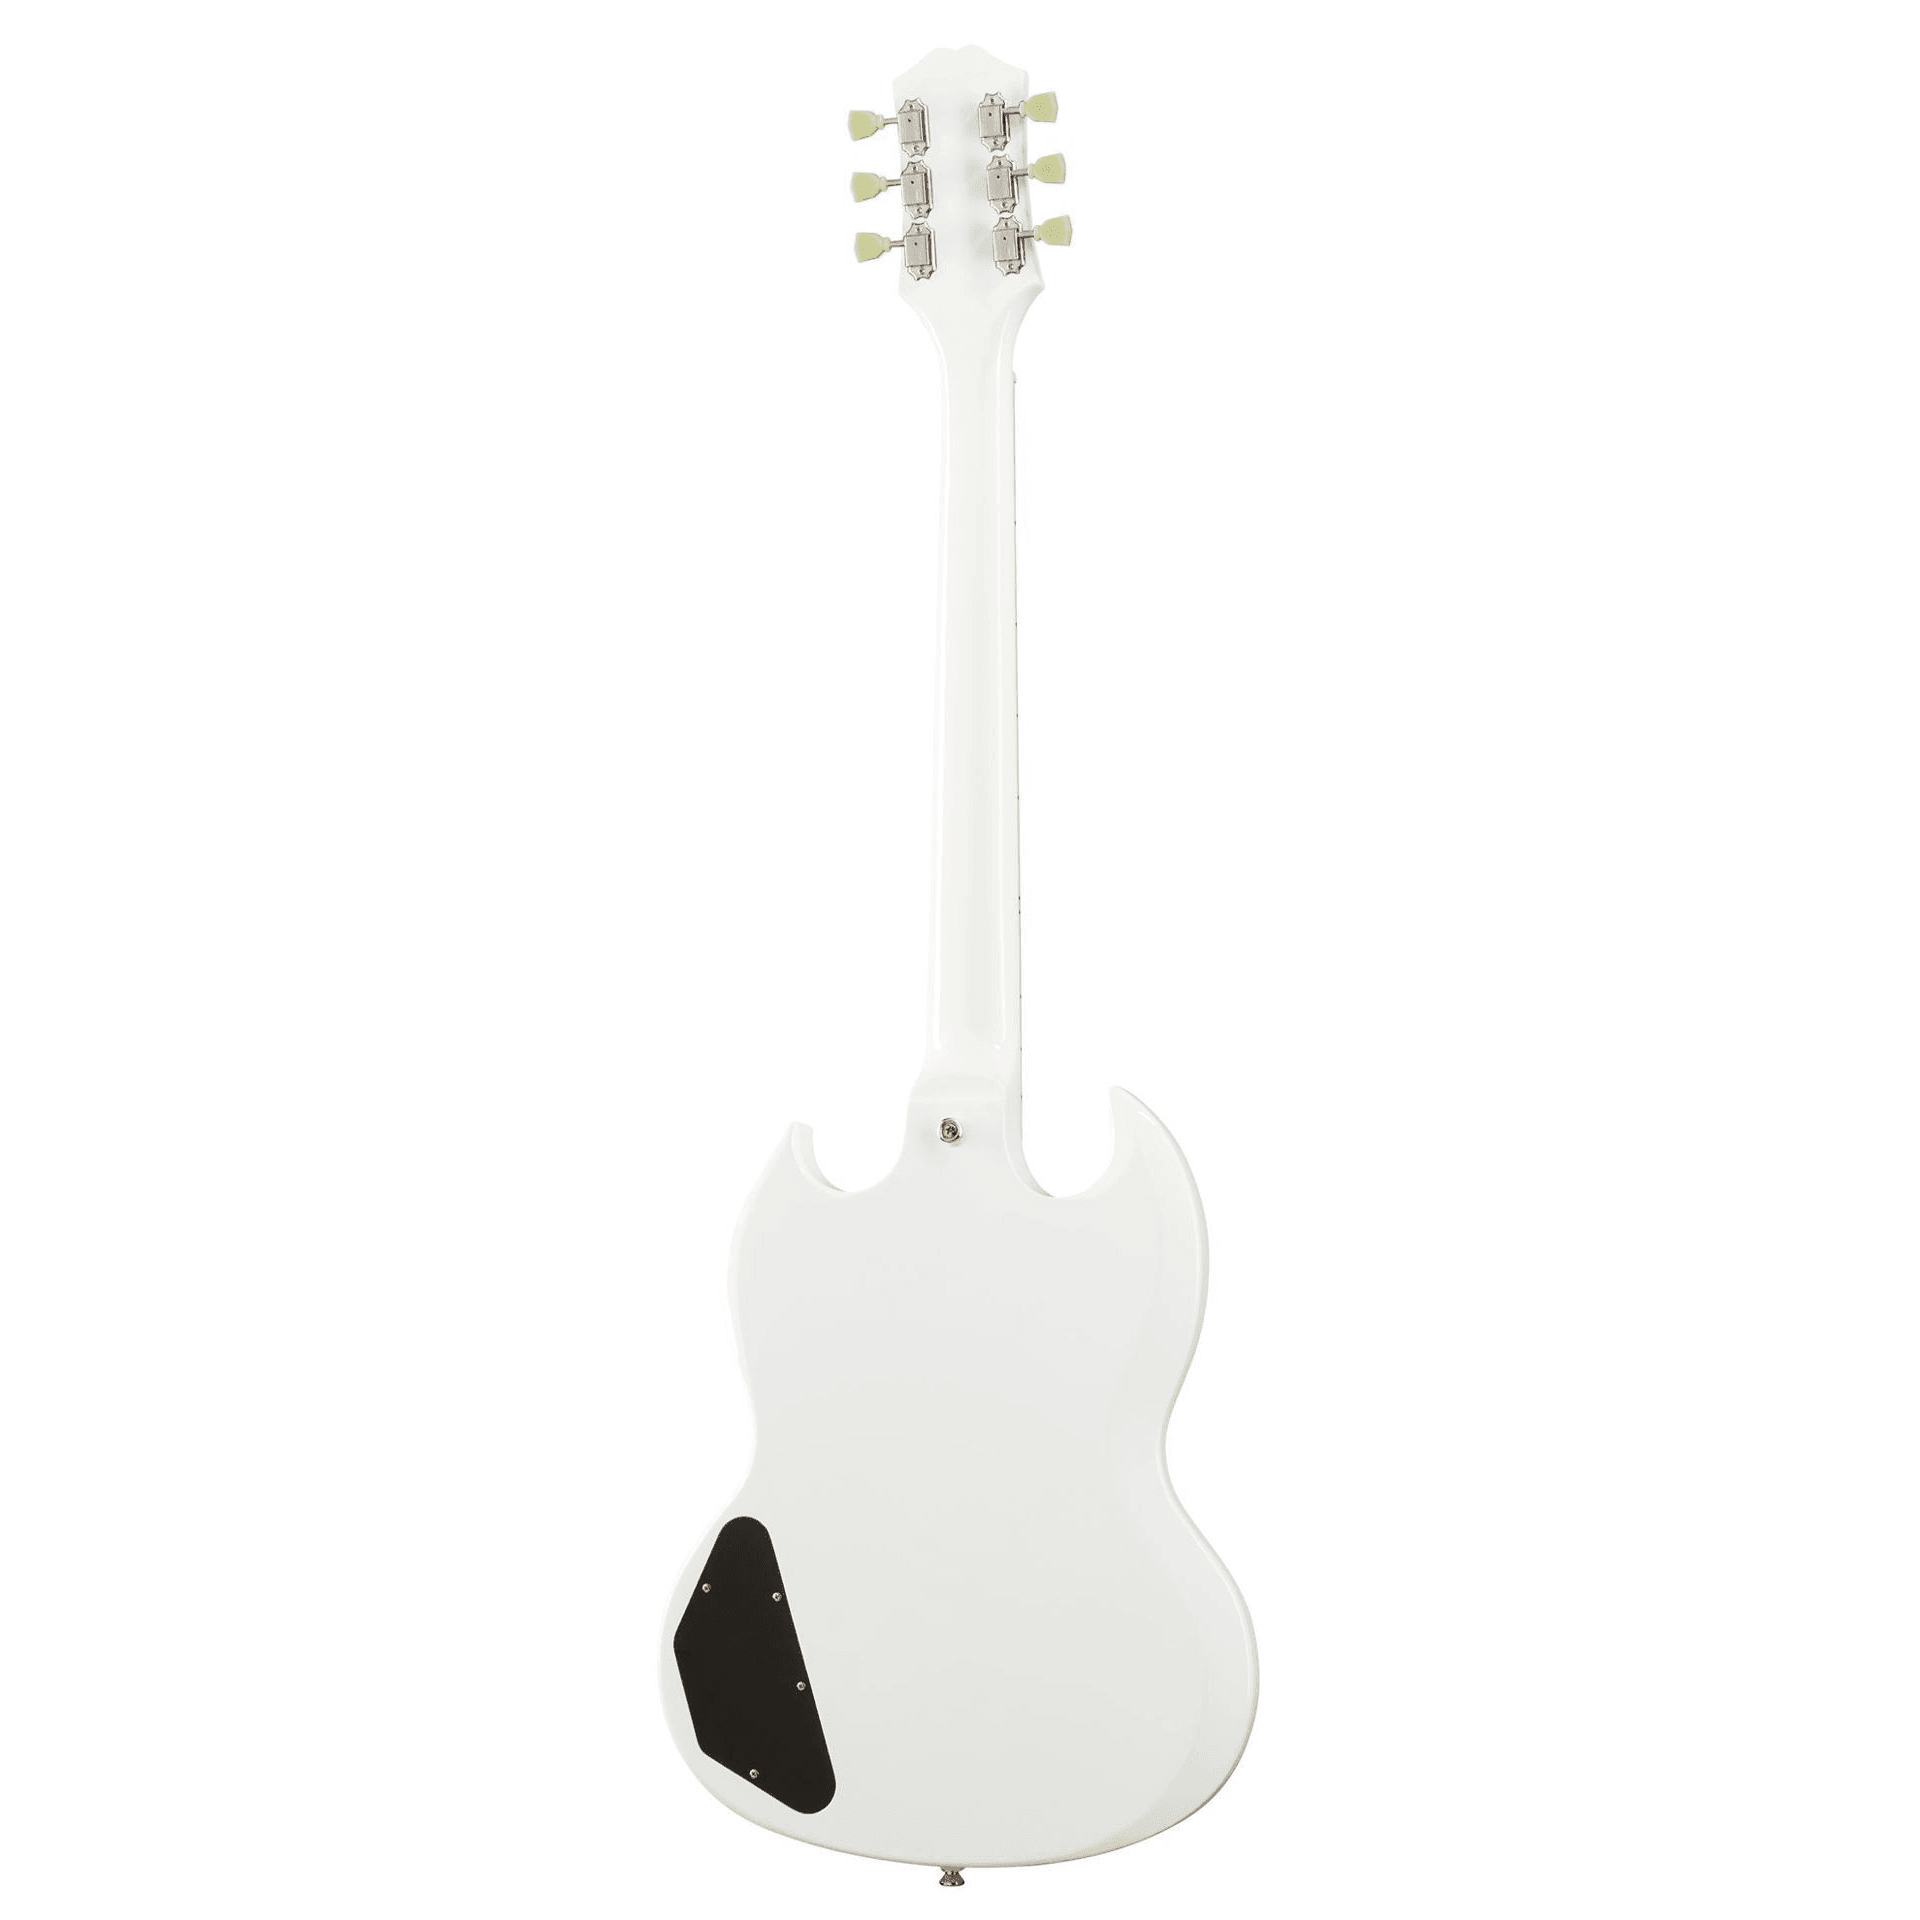 Epiphone SG Standard Alpine White - Guitars - Electric by Epiphone at Muso's Stuff